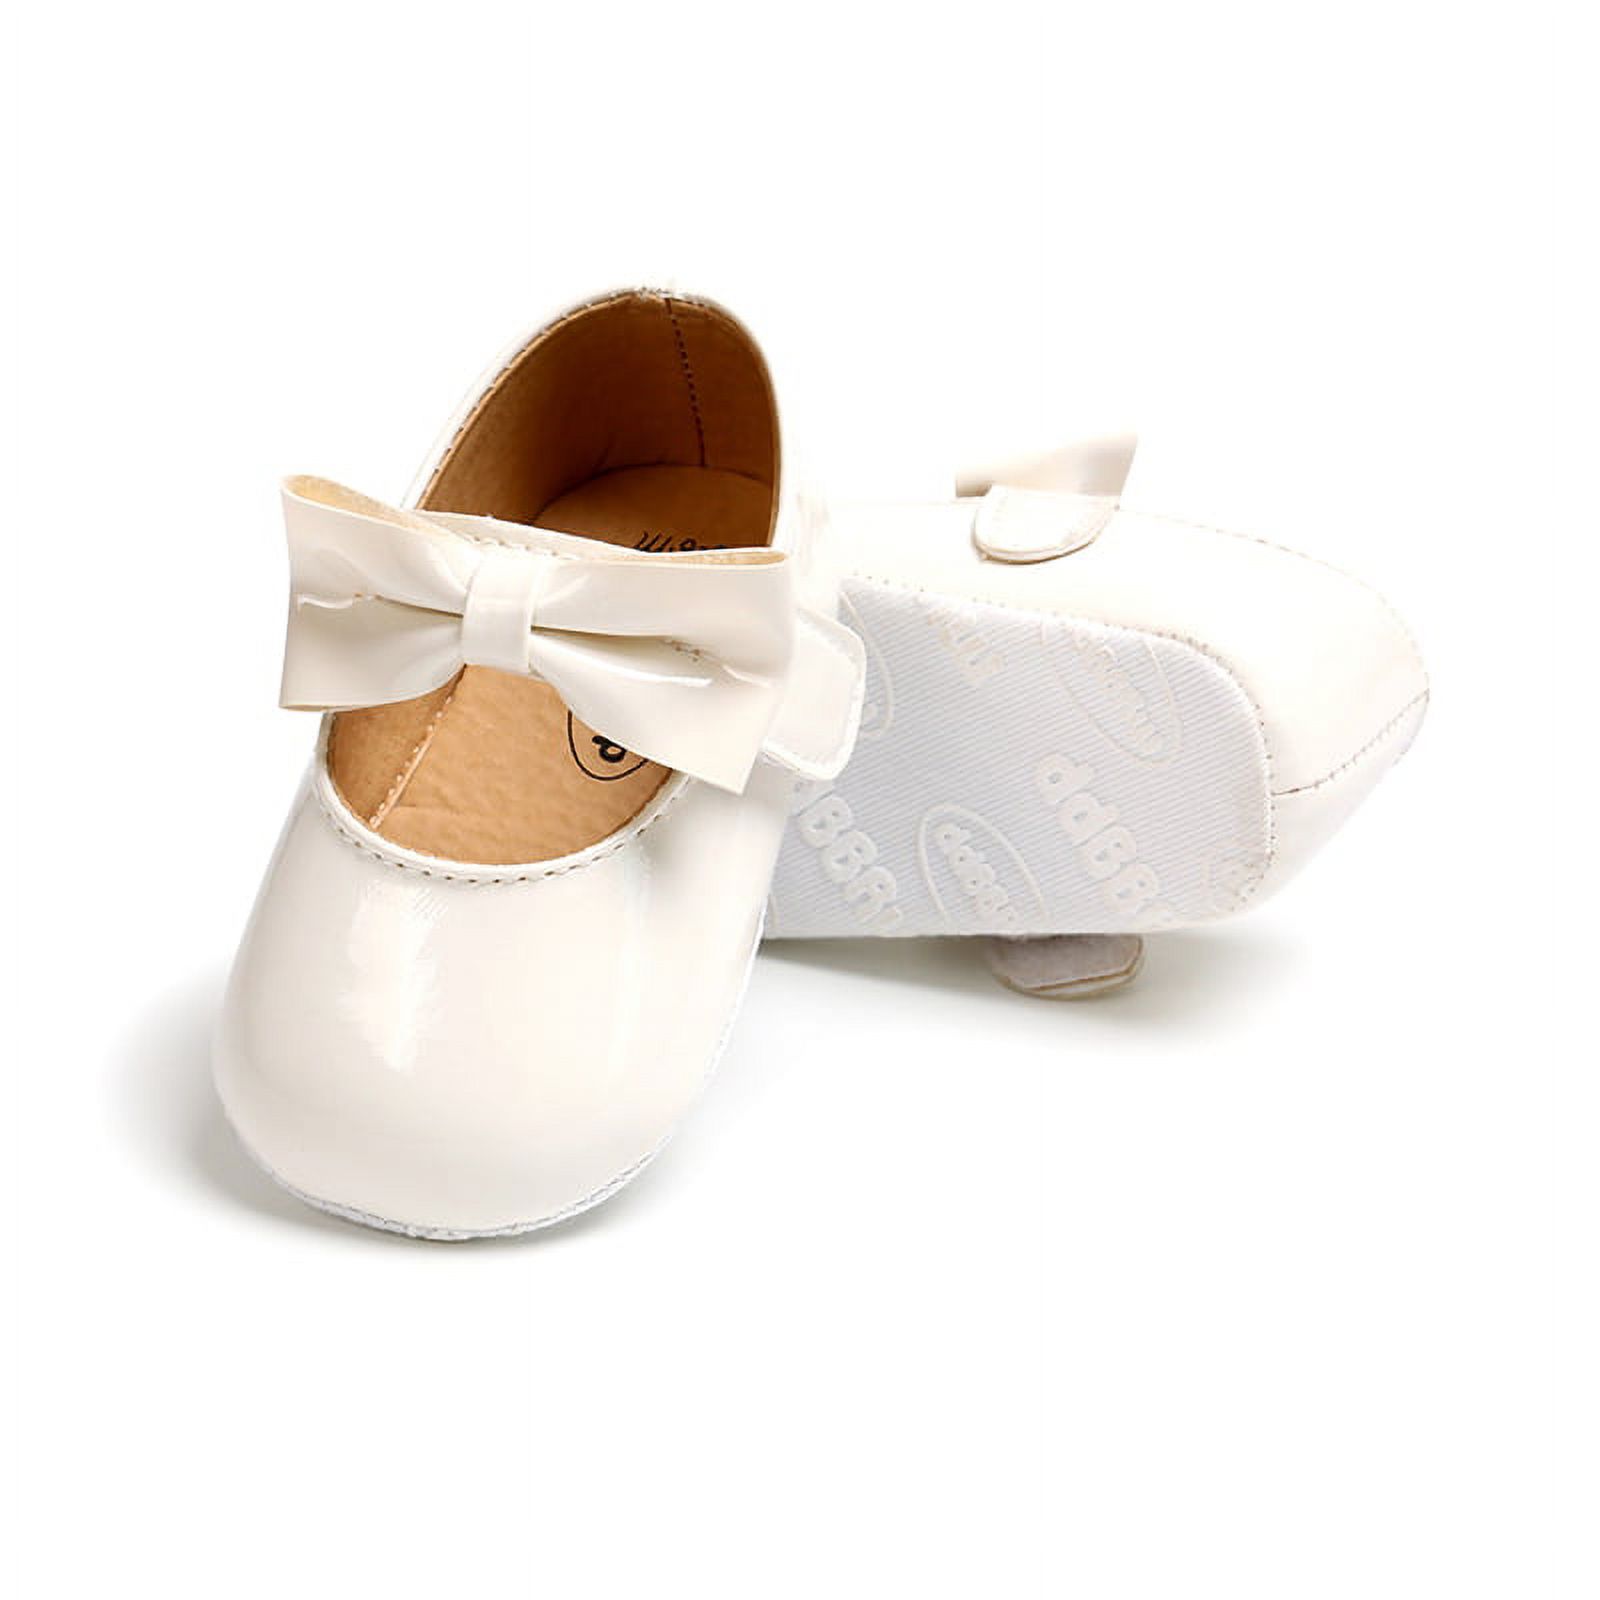 Infant Toddler Baby Girl's Soft Sole Anti-Slip Casual Shoes PU Leather Bowknot Princess Shoes - image 2 of 7